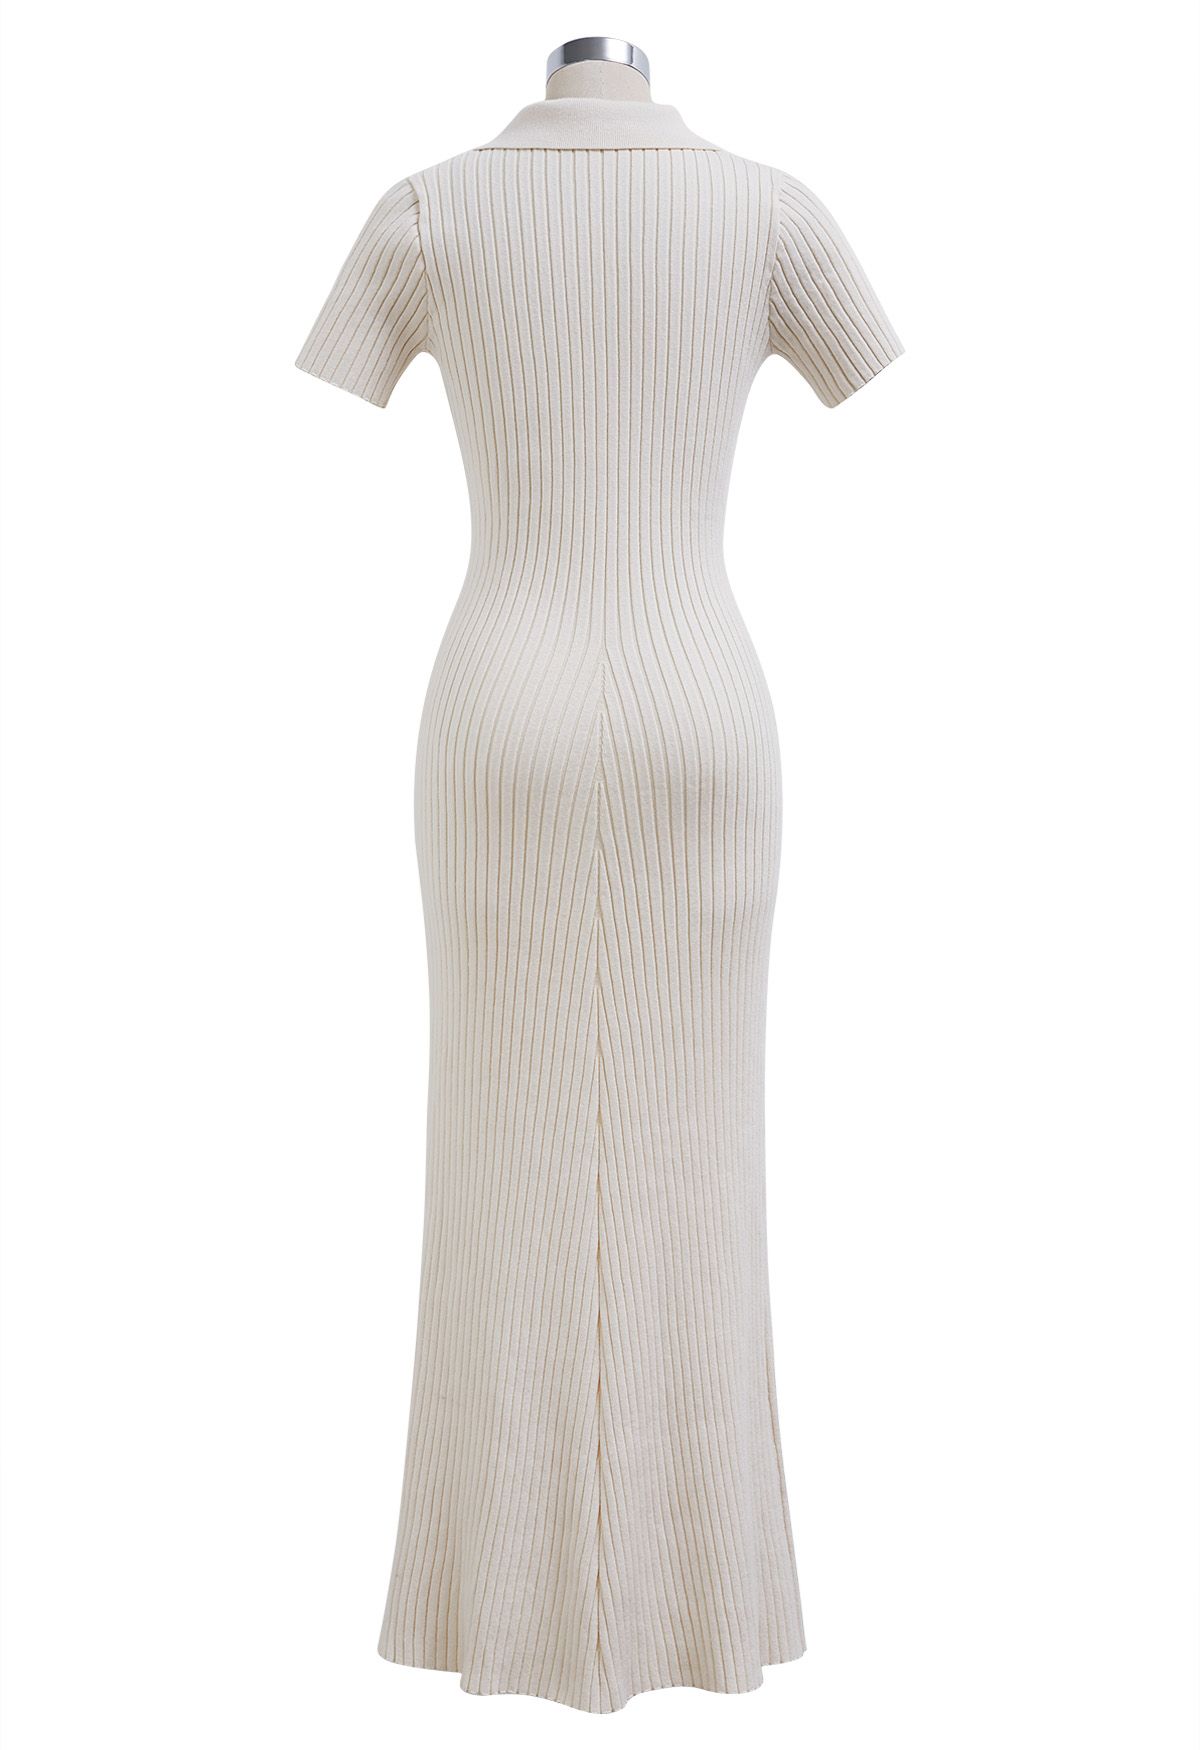 Collared Buttoned Short Sleeve Bodycon Knit Dress in Cream